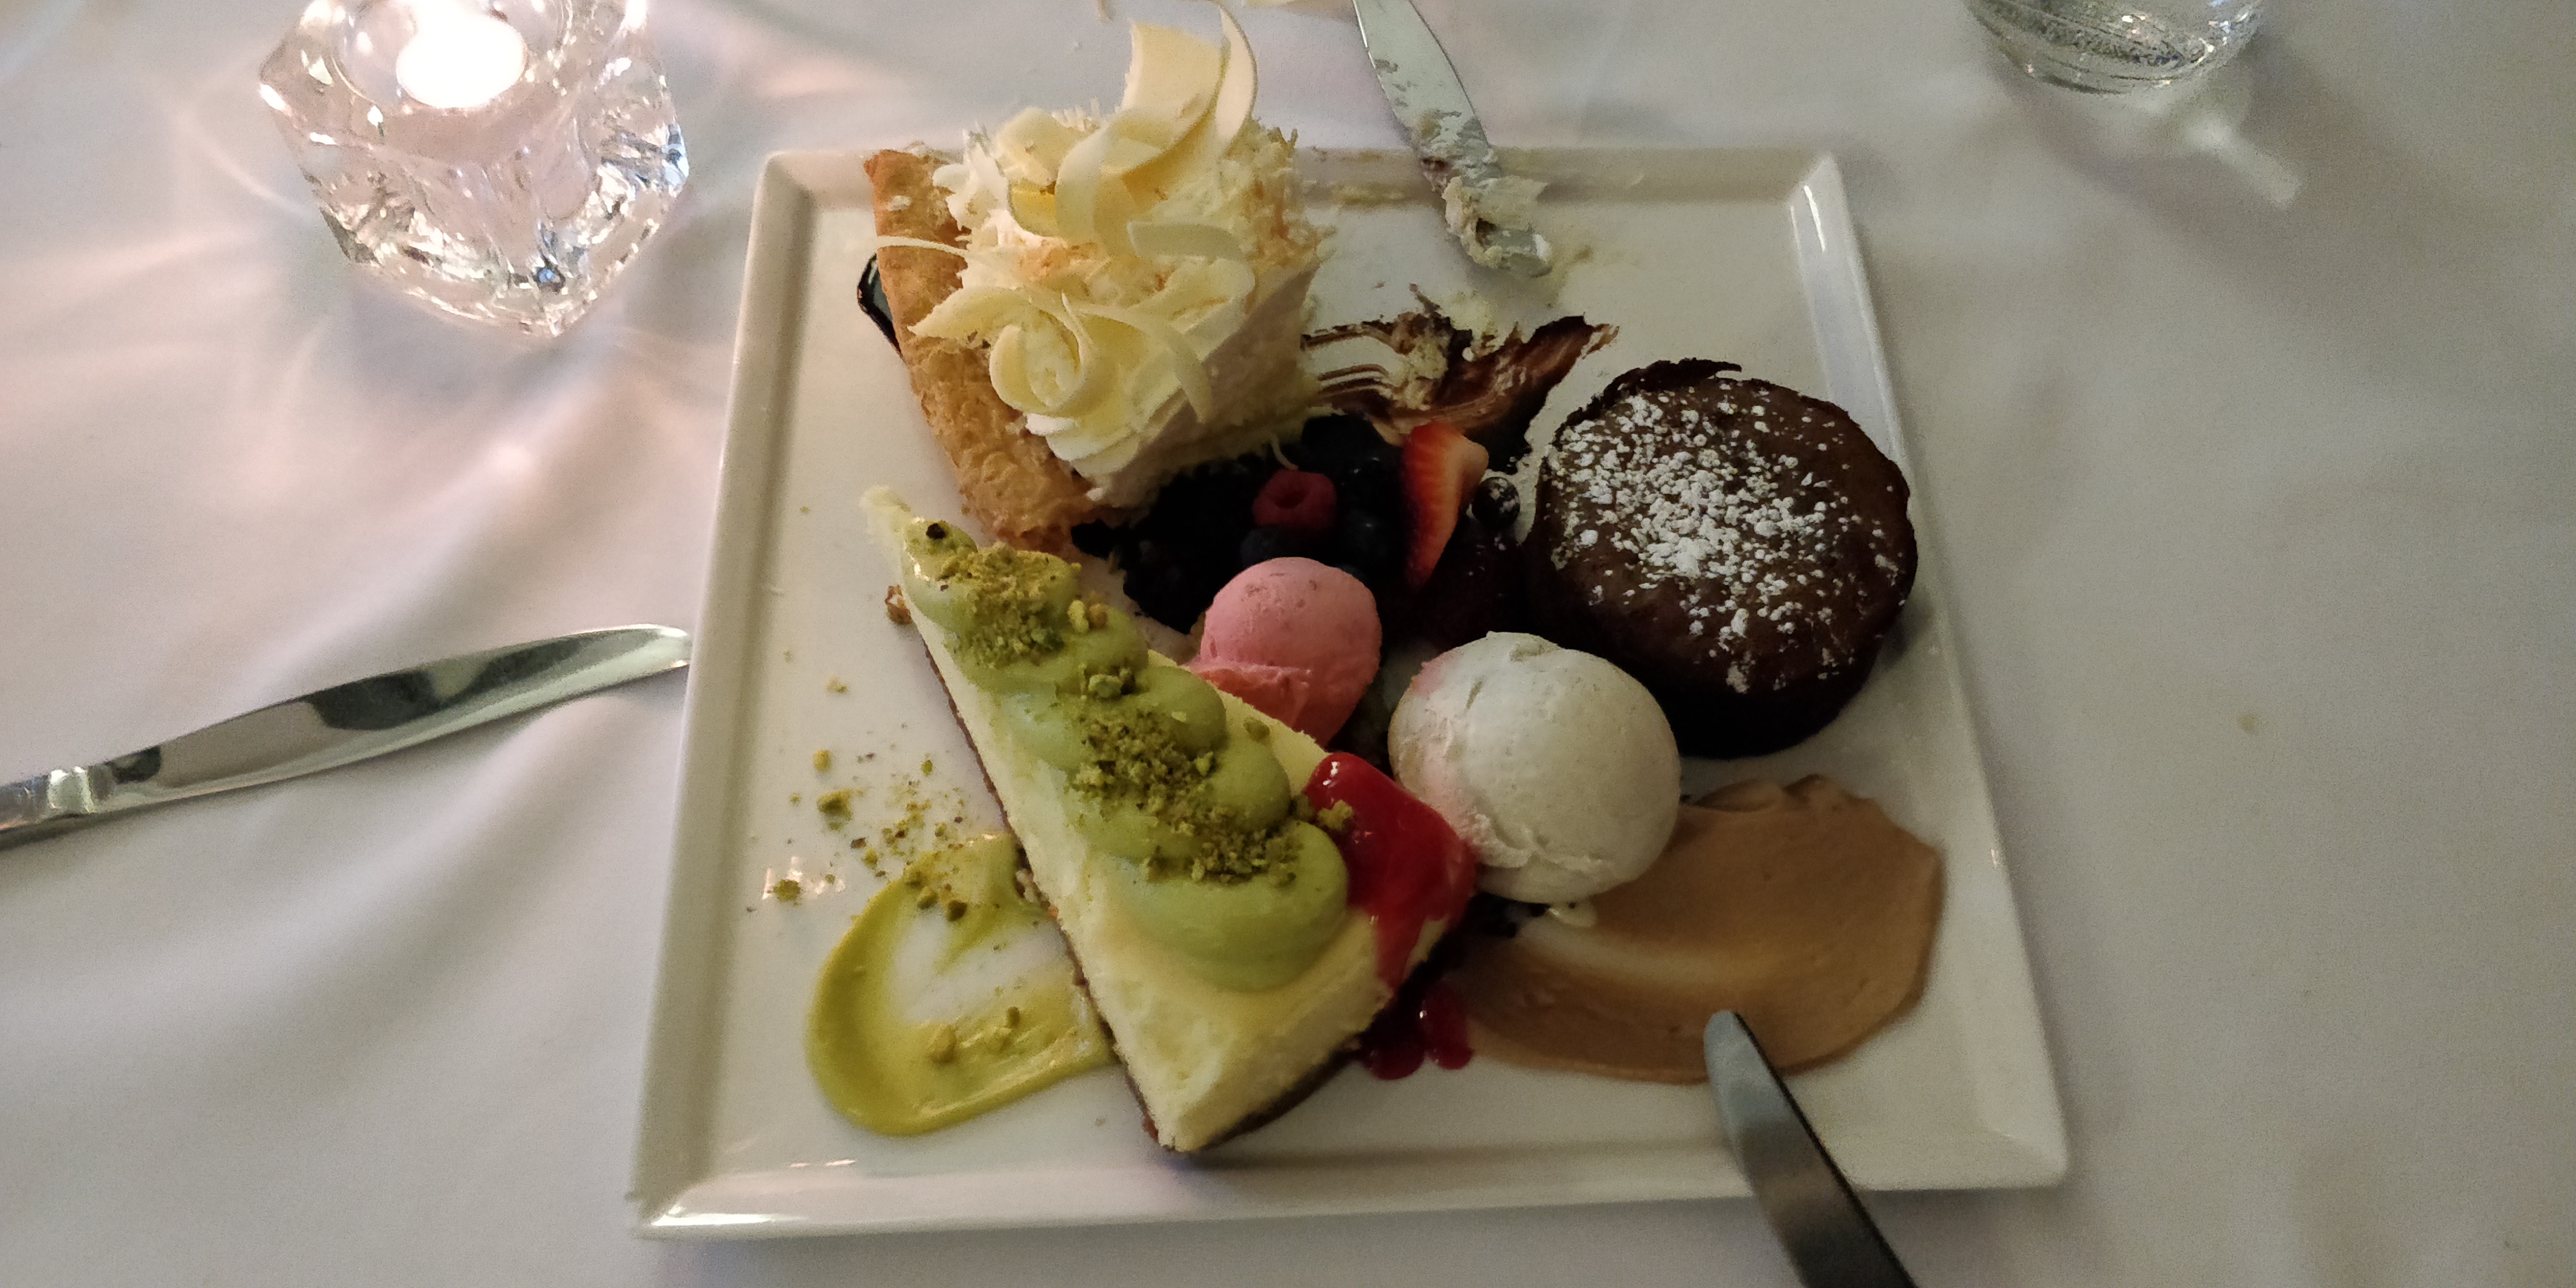 A picture of the desert dish at harbour sixty restaurant.